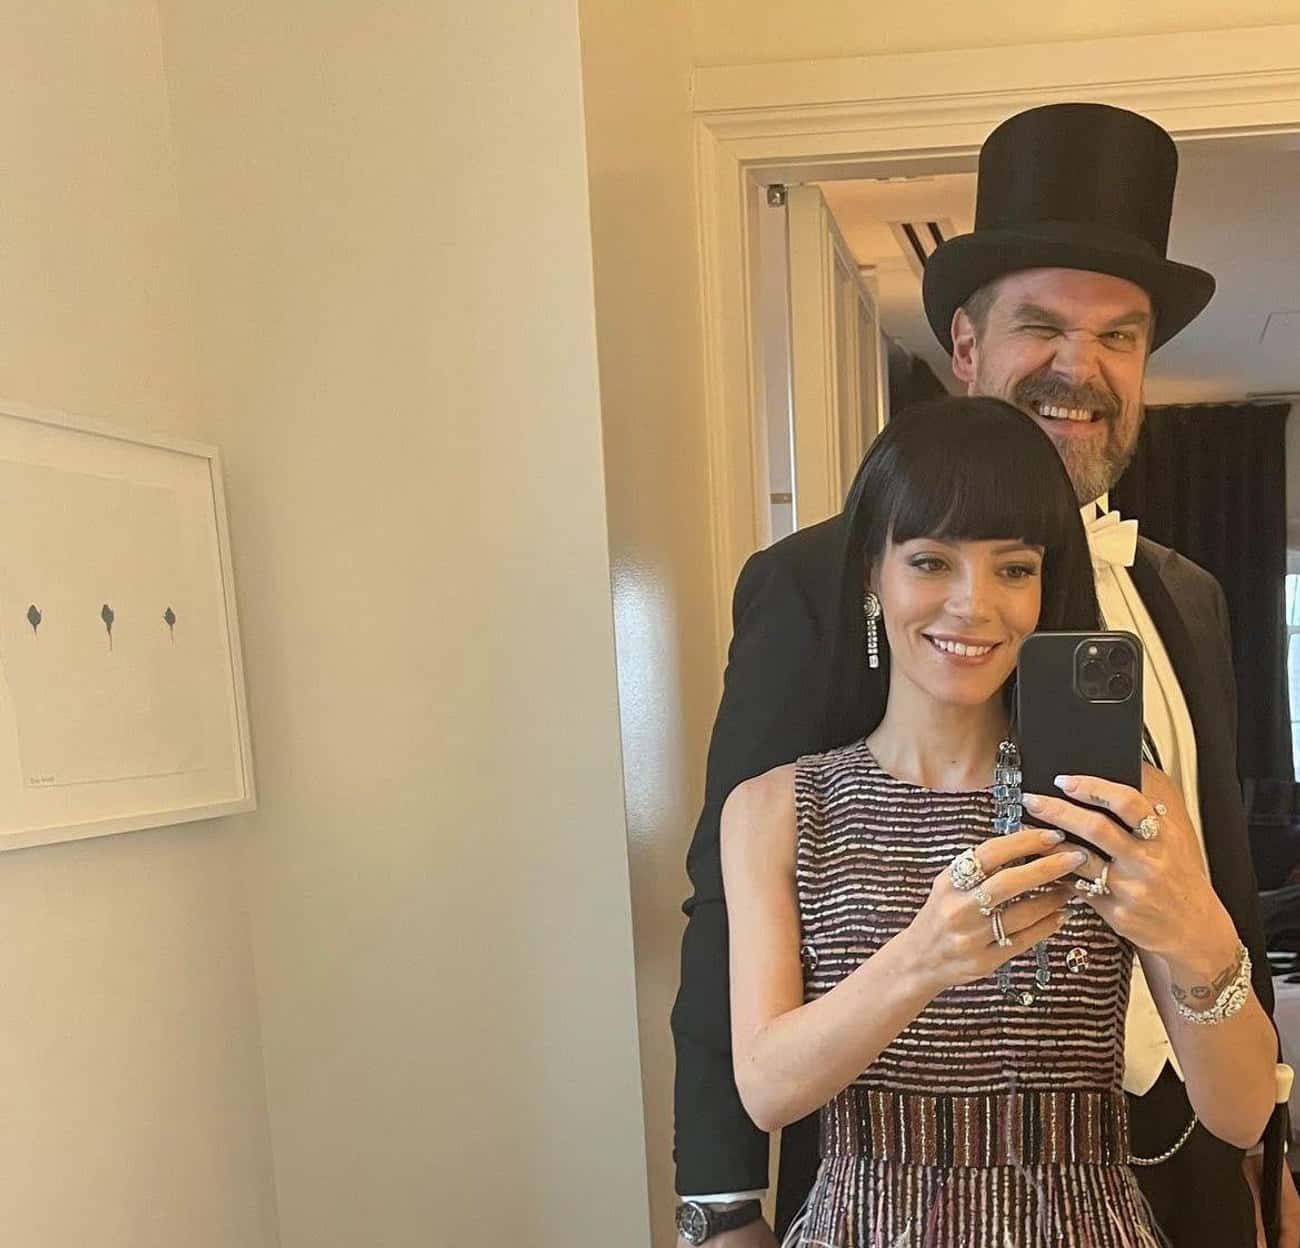 David Harbour Said Lily Allen Fell For Him On Their First Date Even Though He Was At His ‘Worst’ Physically